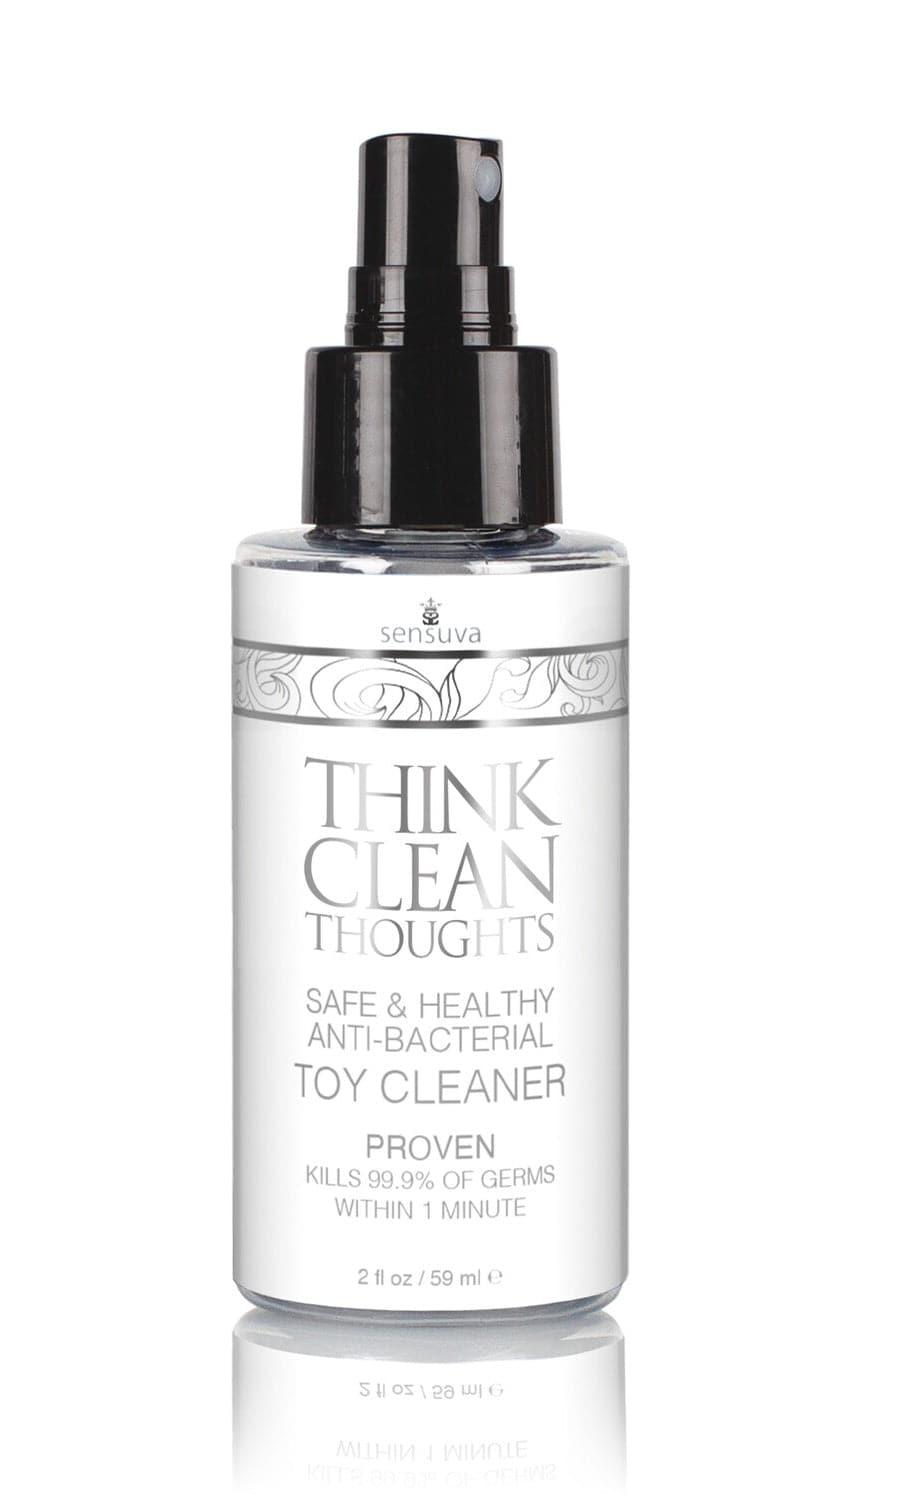 sex toy cleaner, cleaning sex toys